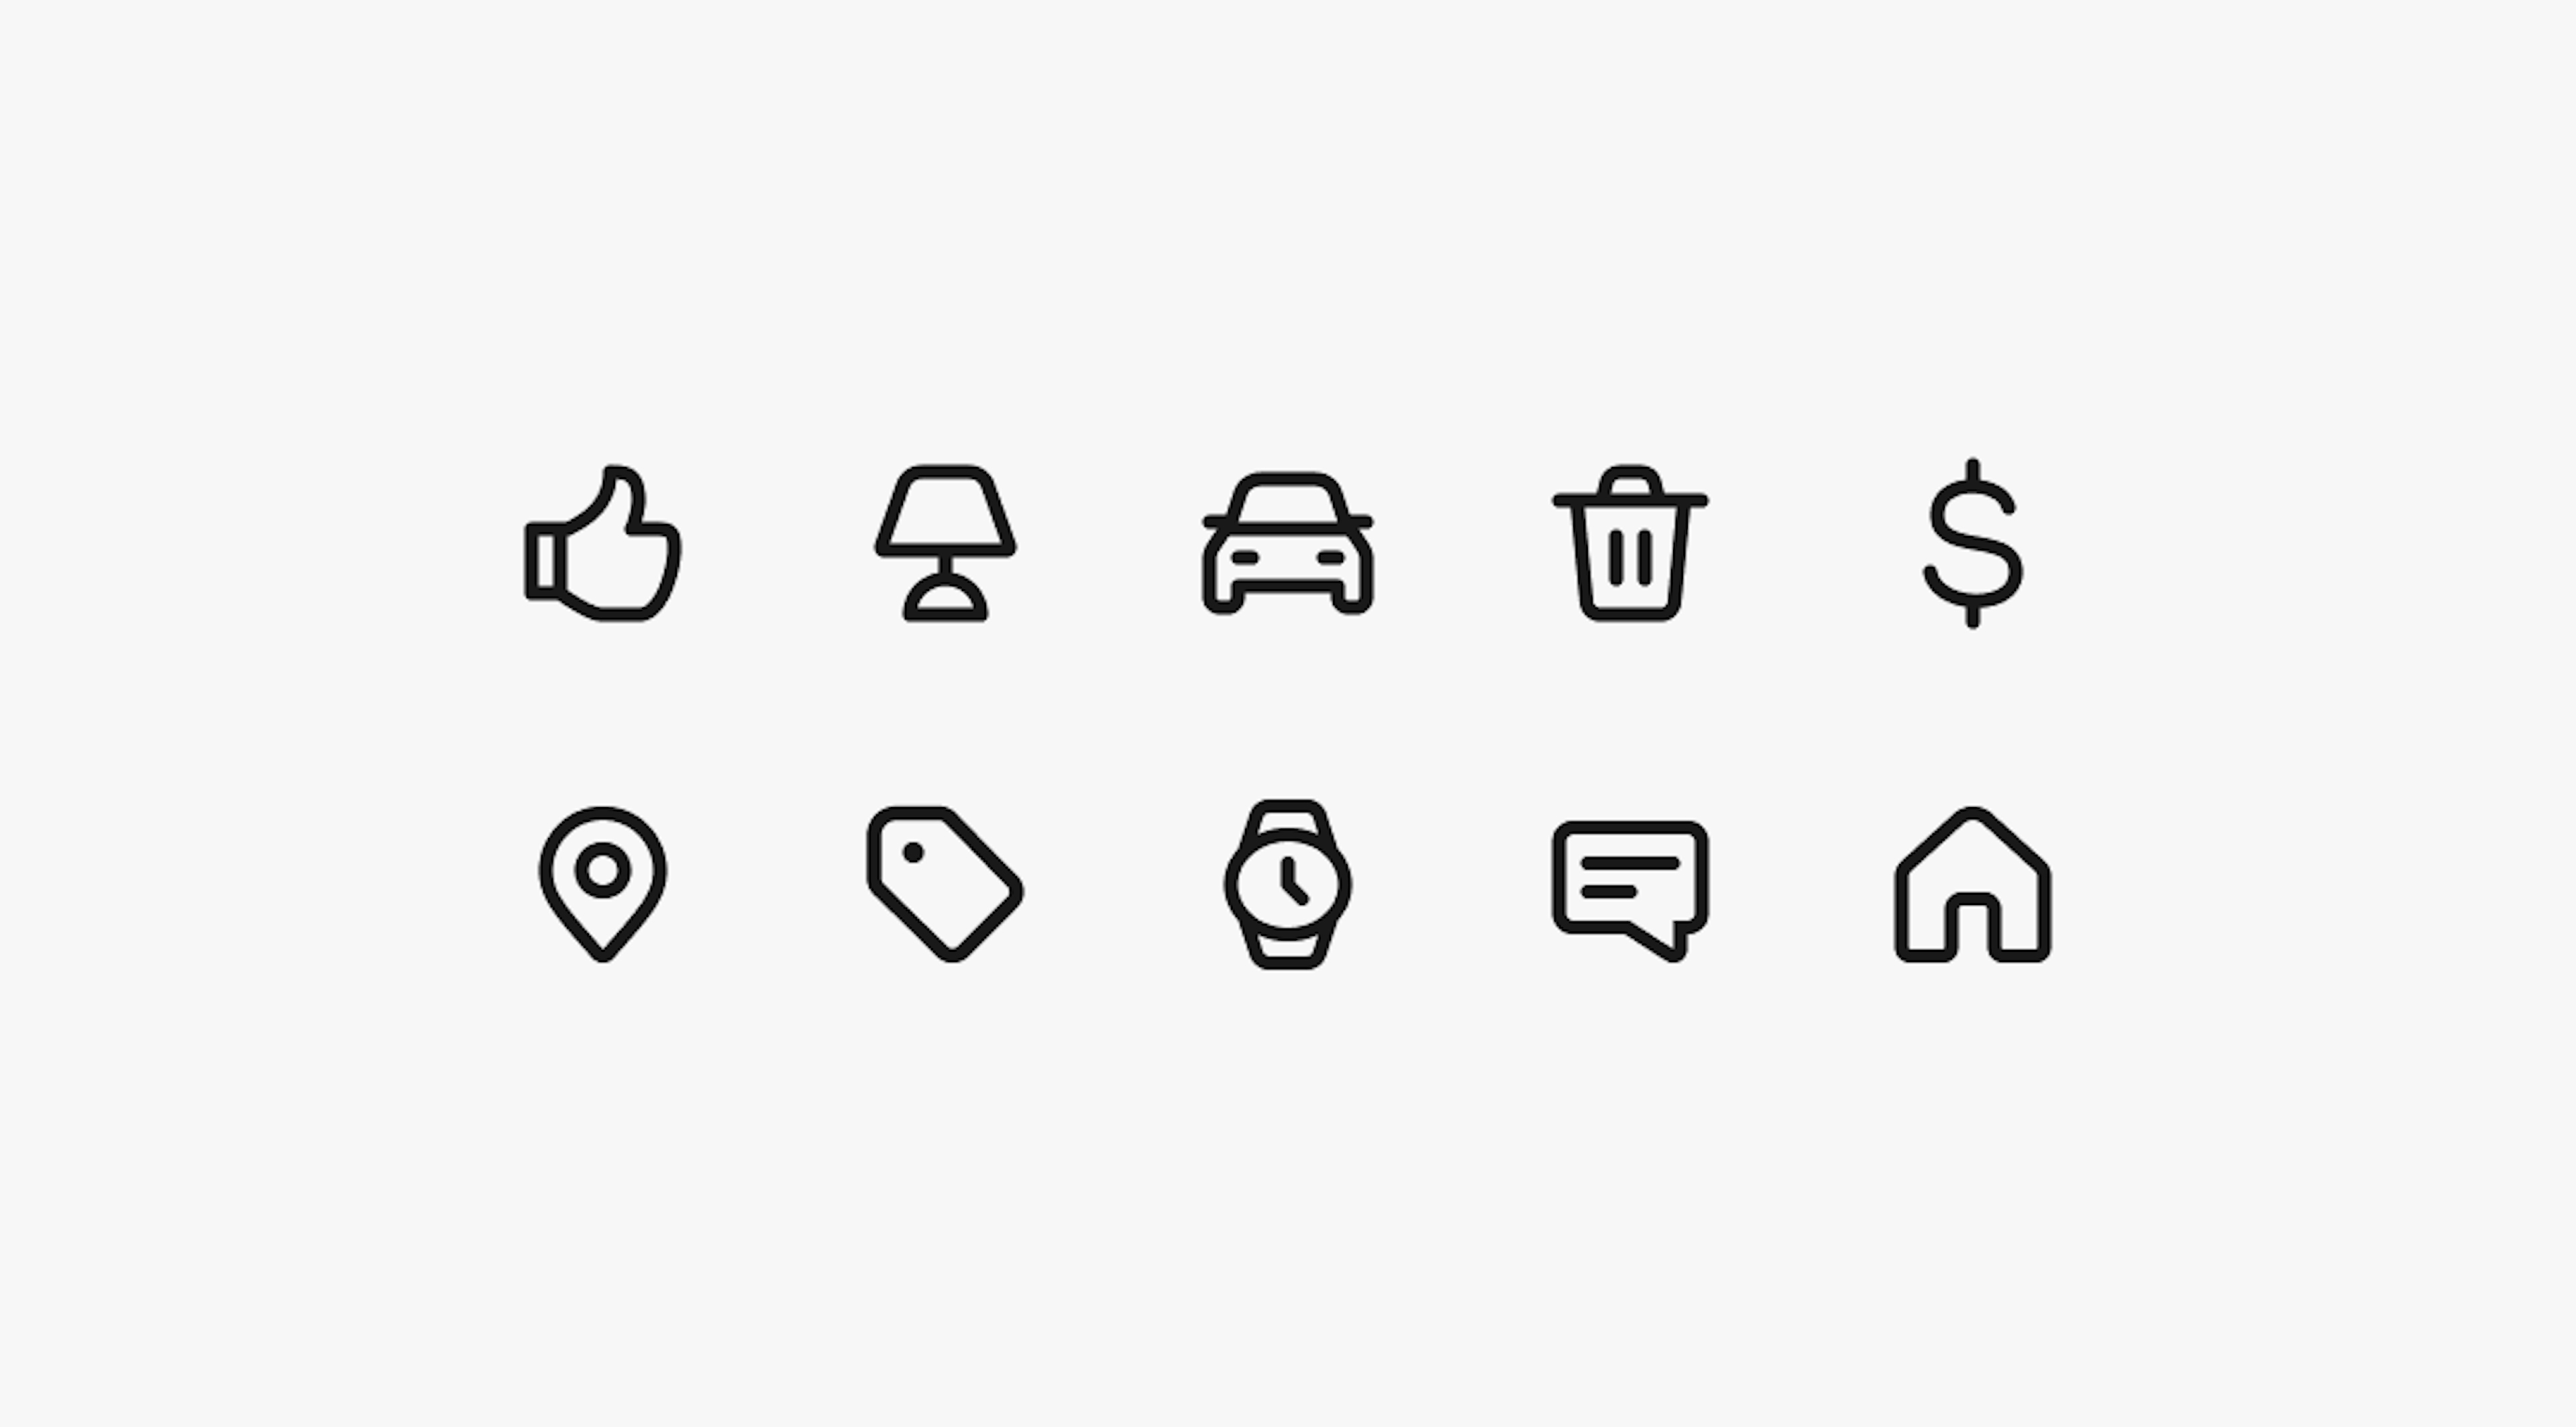 Two rows of icons. The top row includes thumb up, lamp, cart, trash, and dollar. The bottom row includes location, selling, watch, text message, and home.